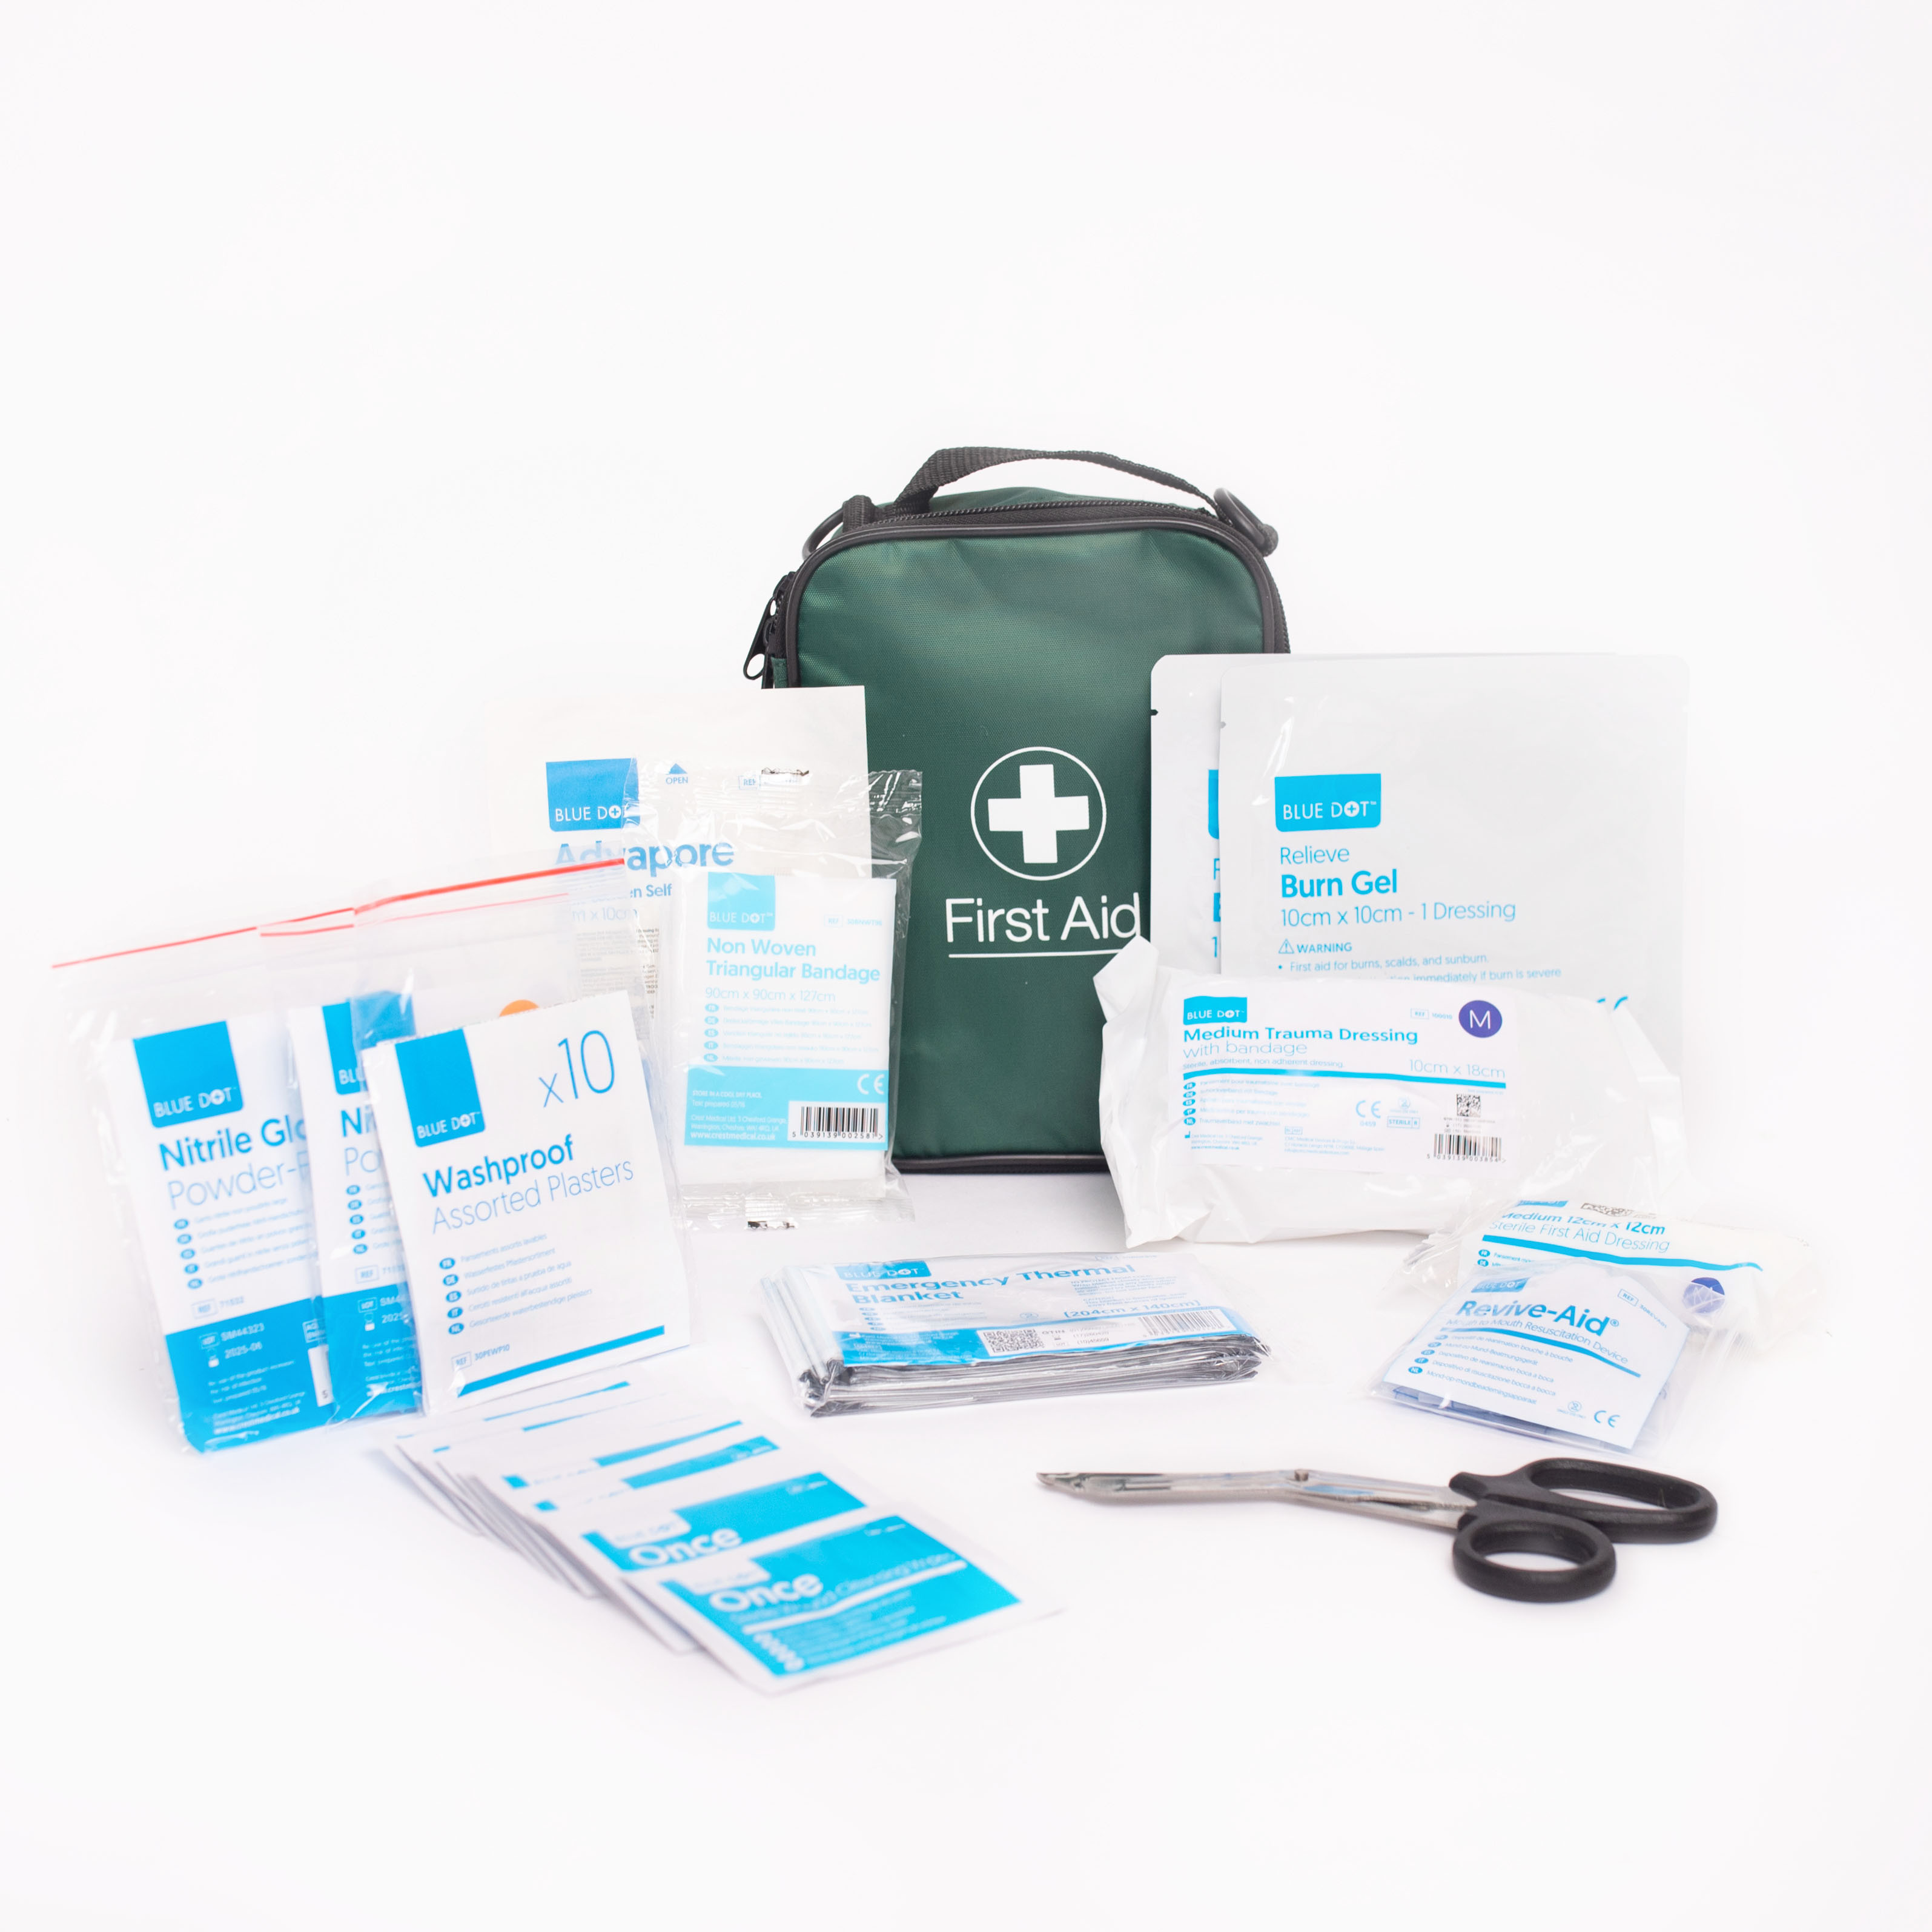 BS 8599-1 Travel First Aid Kit in Portable Bag